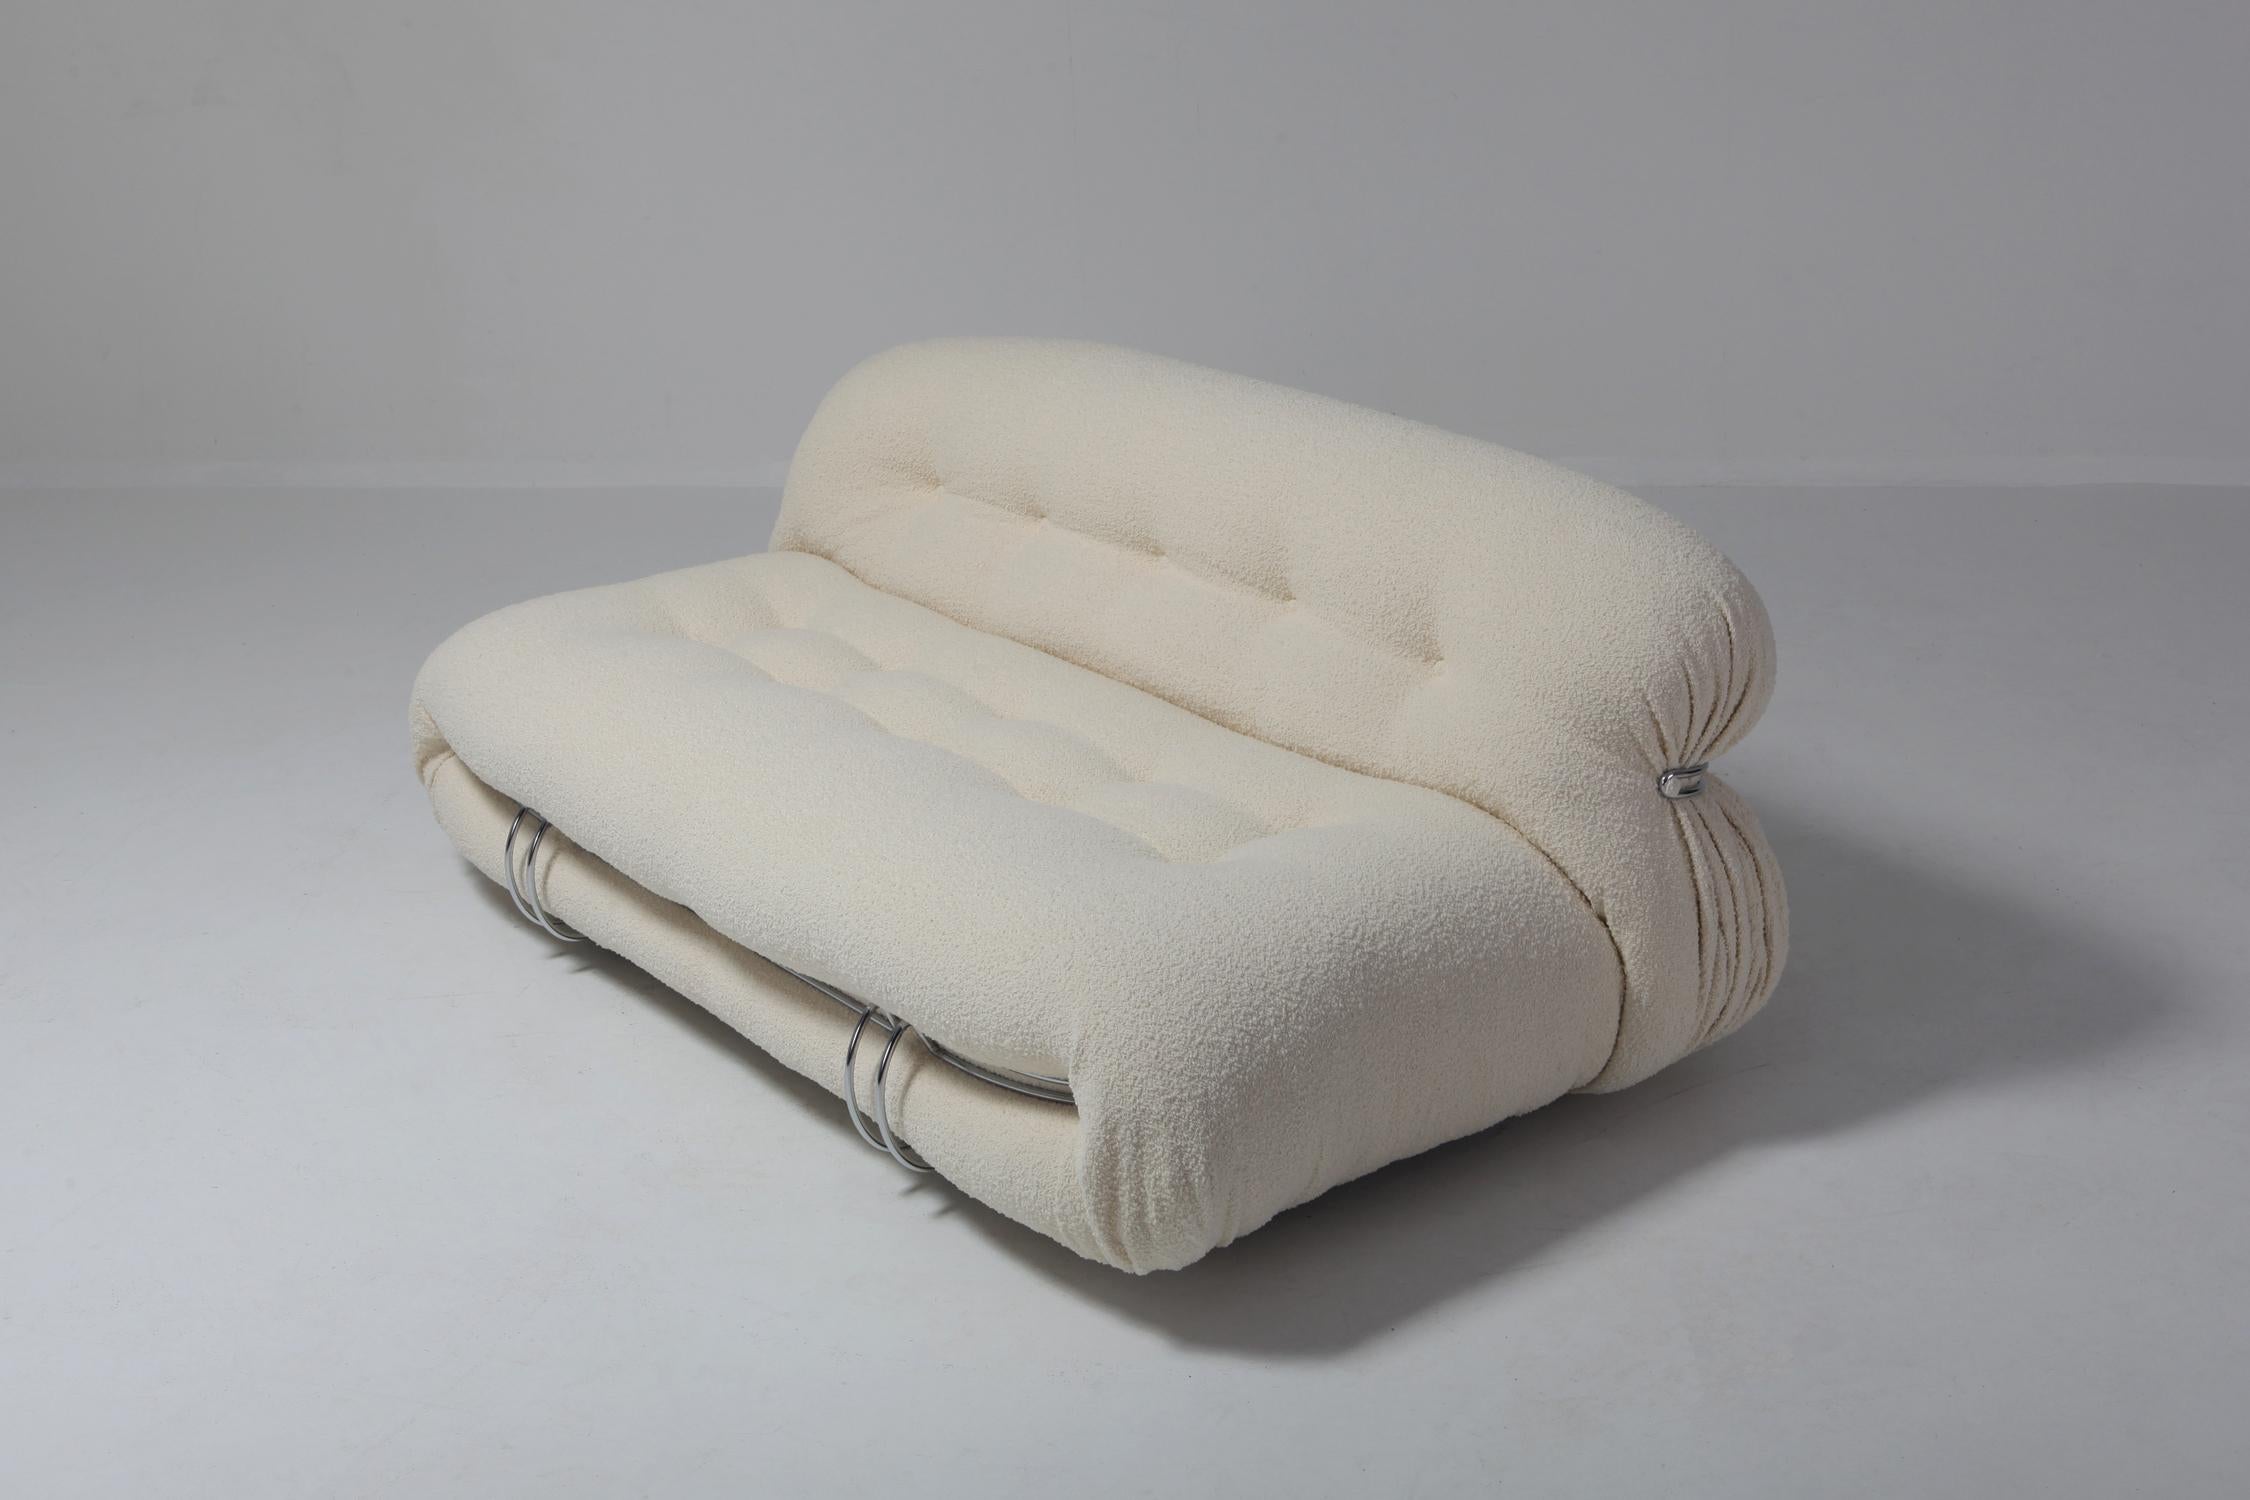 Post-Modern Soriana Two-Seat Sofa by Afra e Tobia Scarpa for Cassina